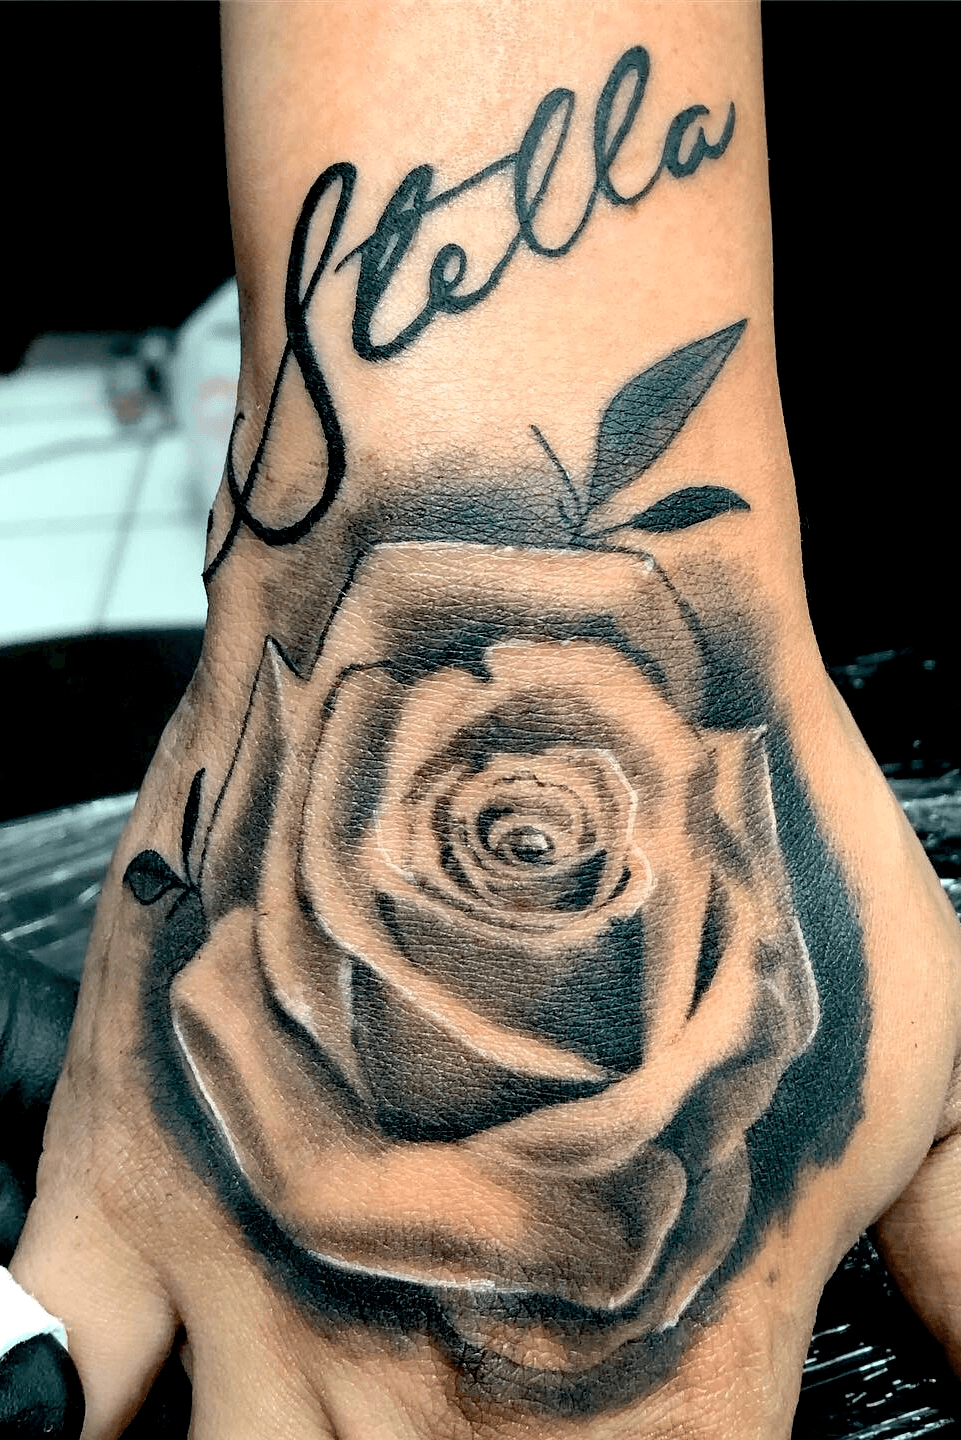 Tattoo uploaded by Kenneth J. • Rose and name tattoo done • Tattoodo